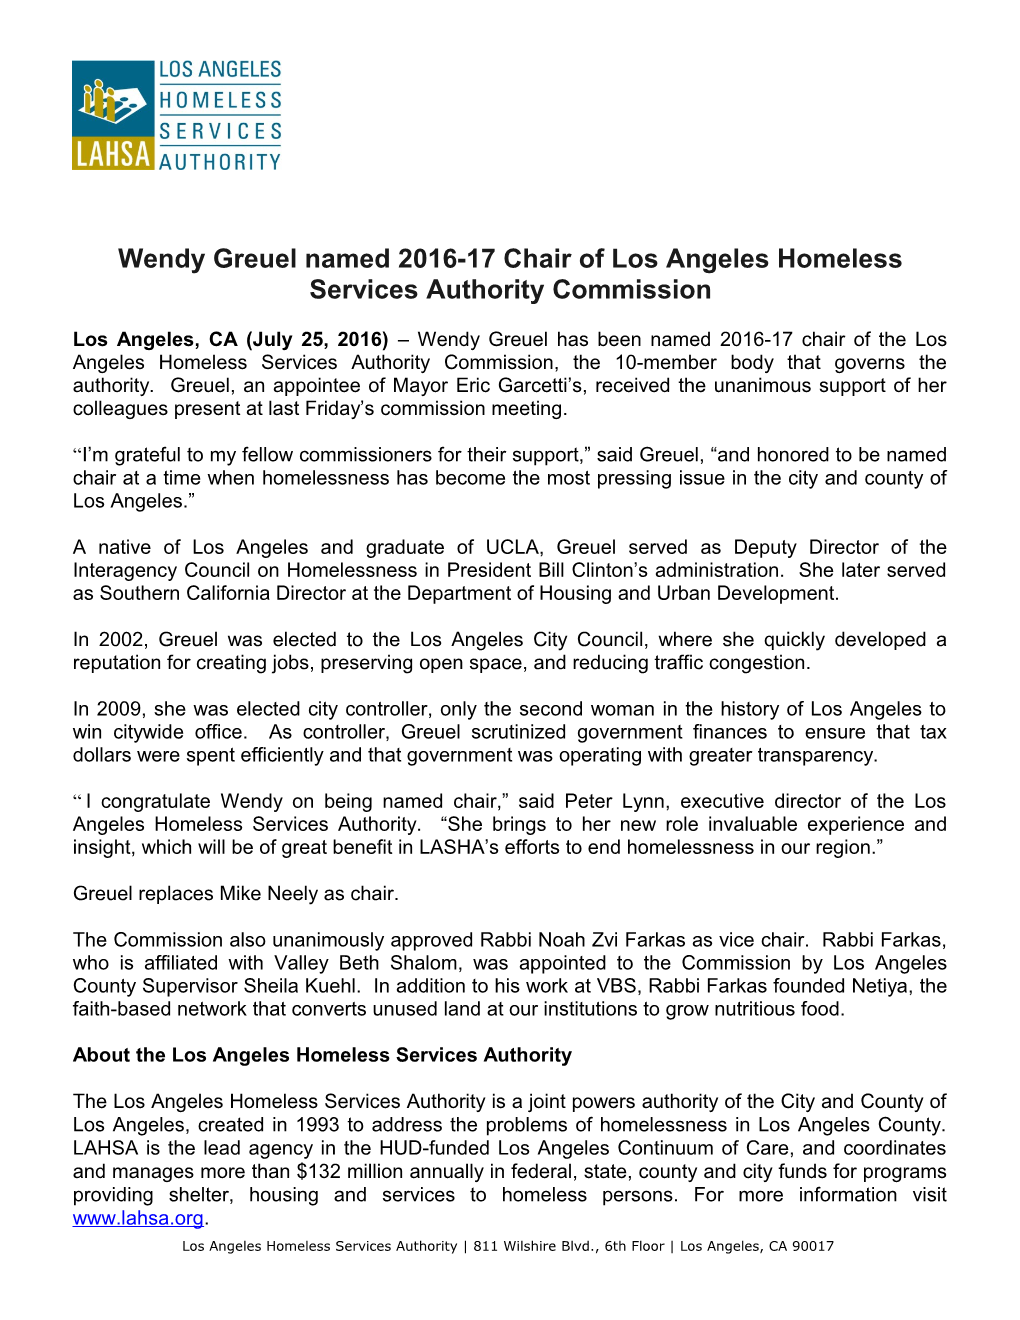 Wendy Greuel Named 2016-17 Chair of Los Angeles Homeless Services Authority Commission